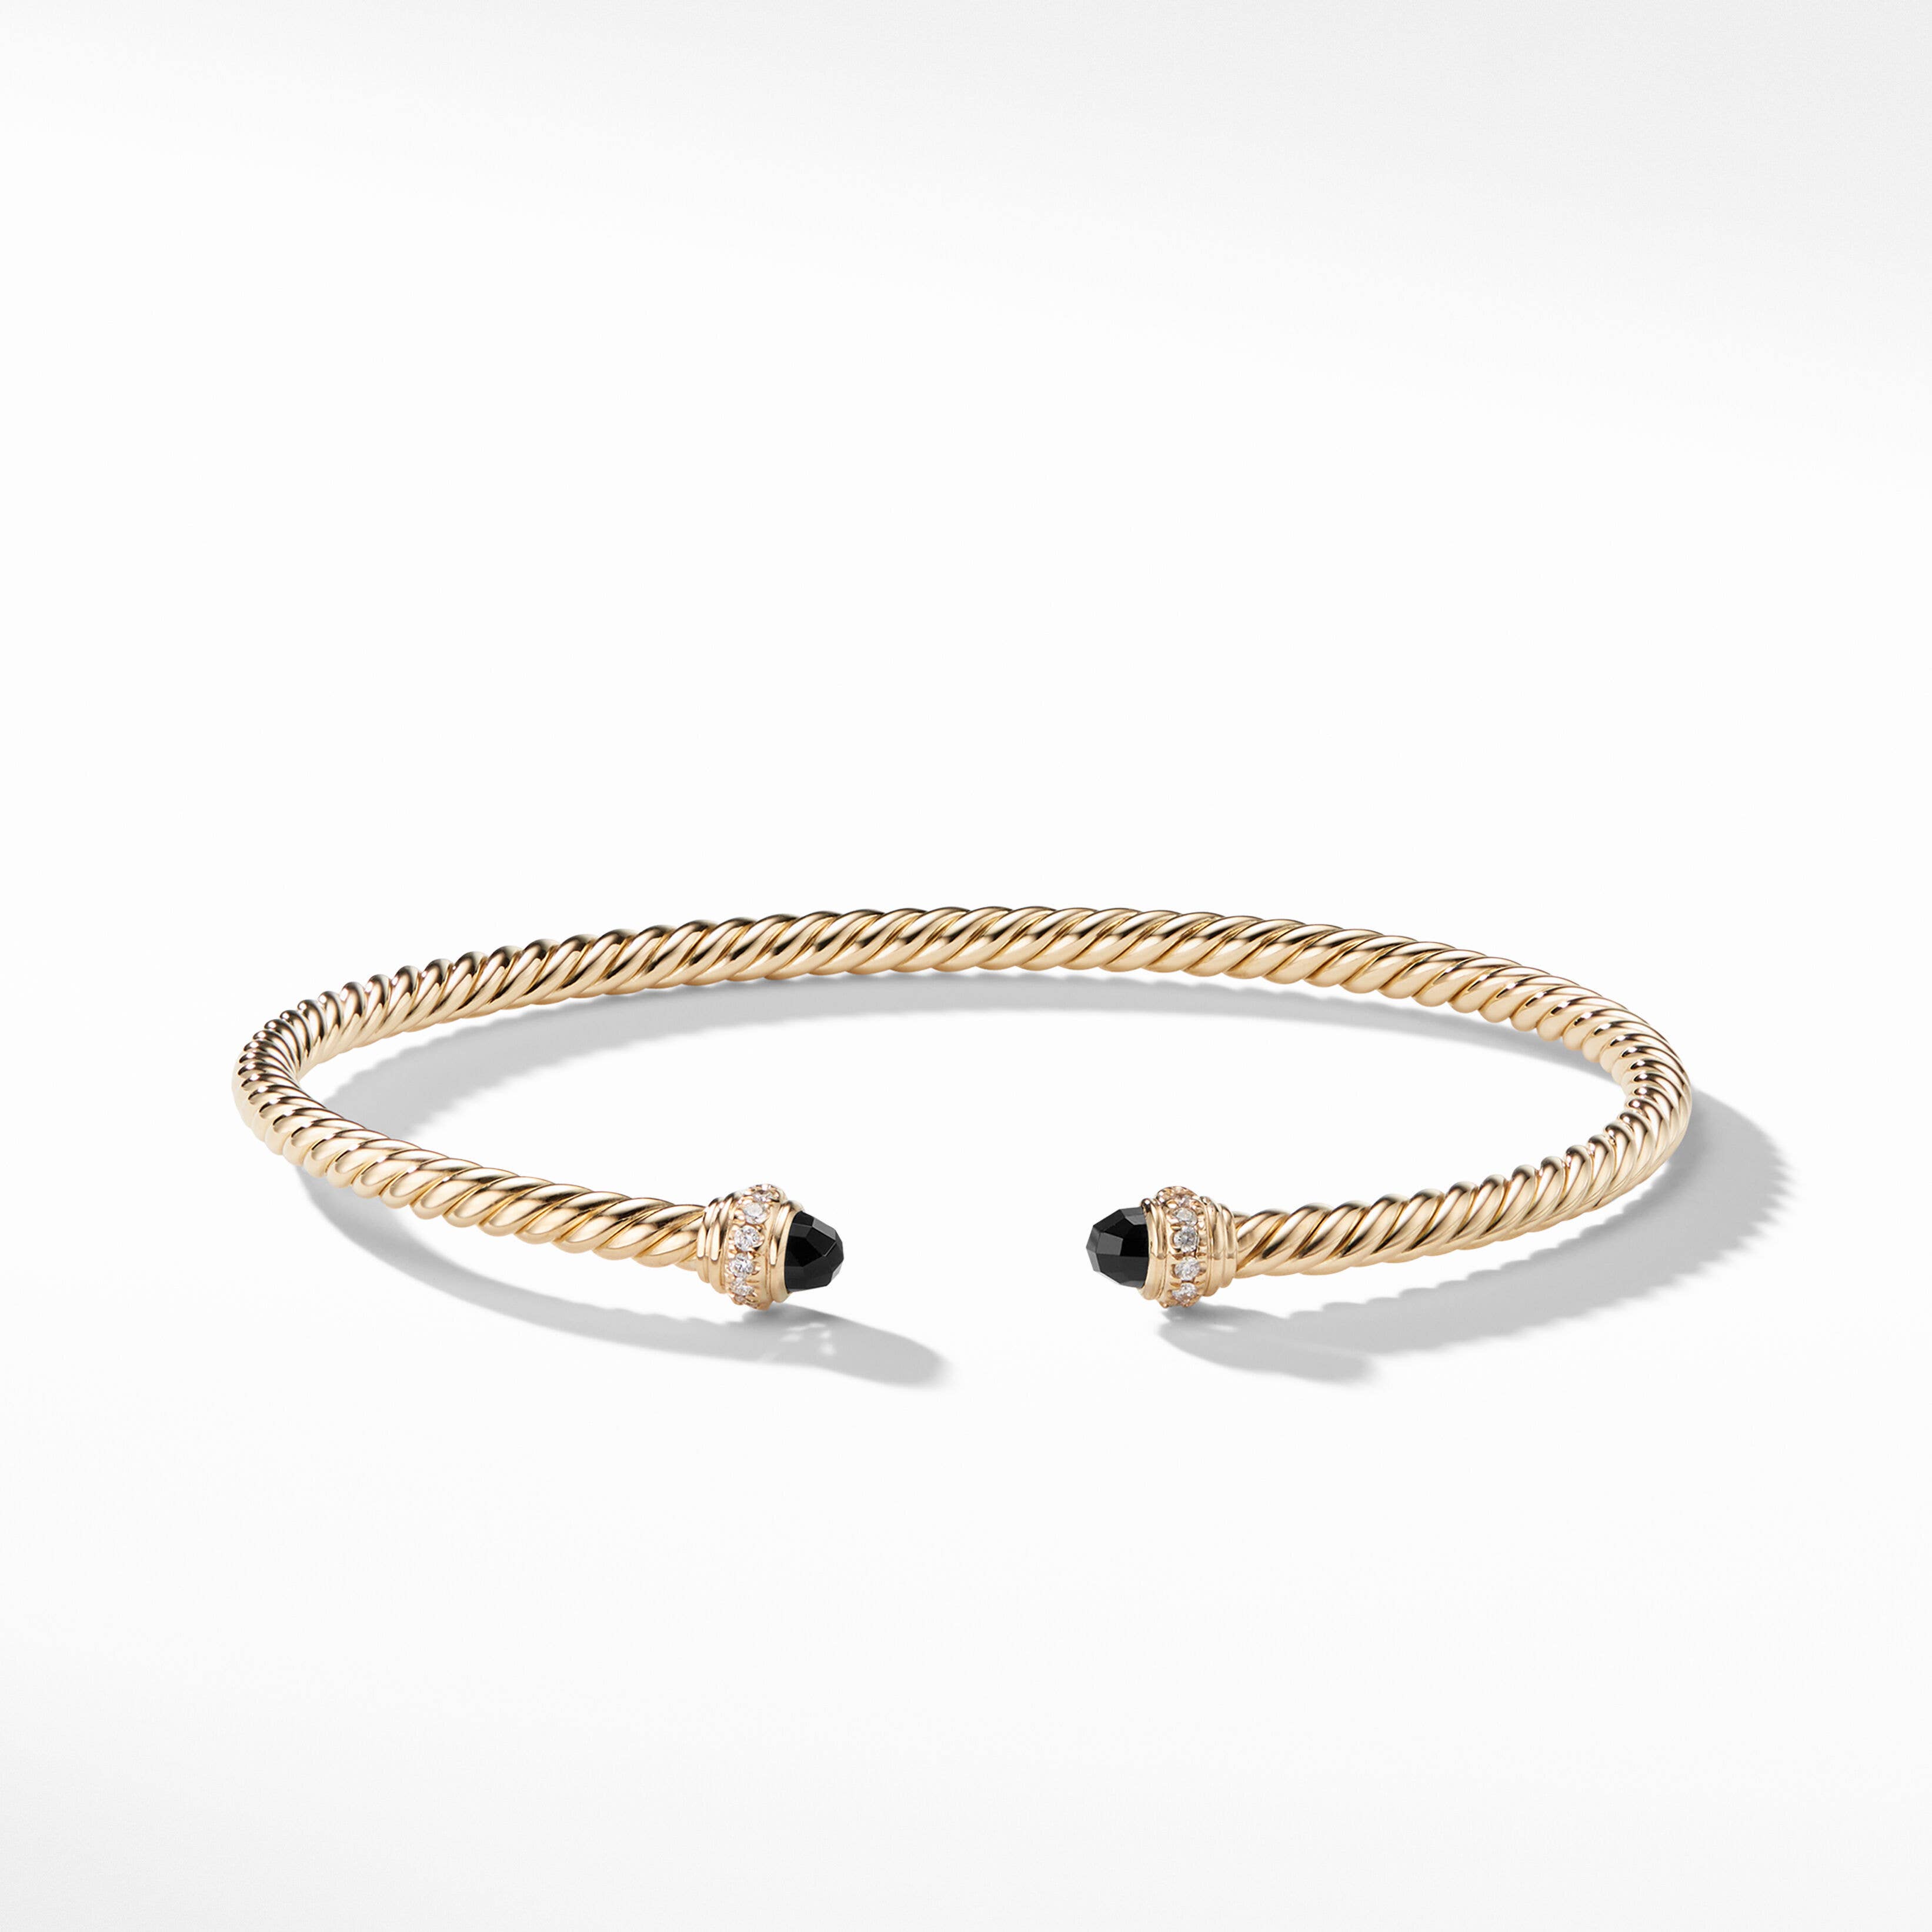 Cablespira® Bracelet in 18K Yellow Gold with Black Onyx and Pavé Diamonds